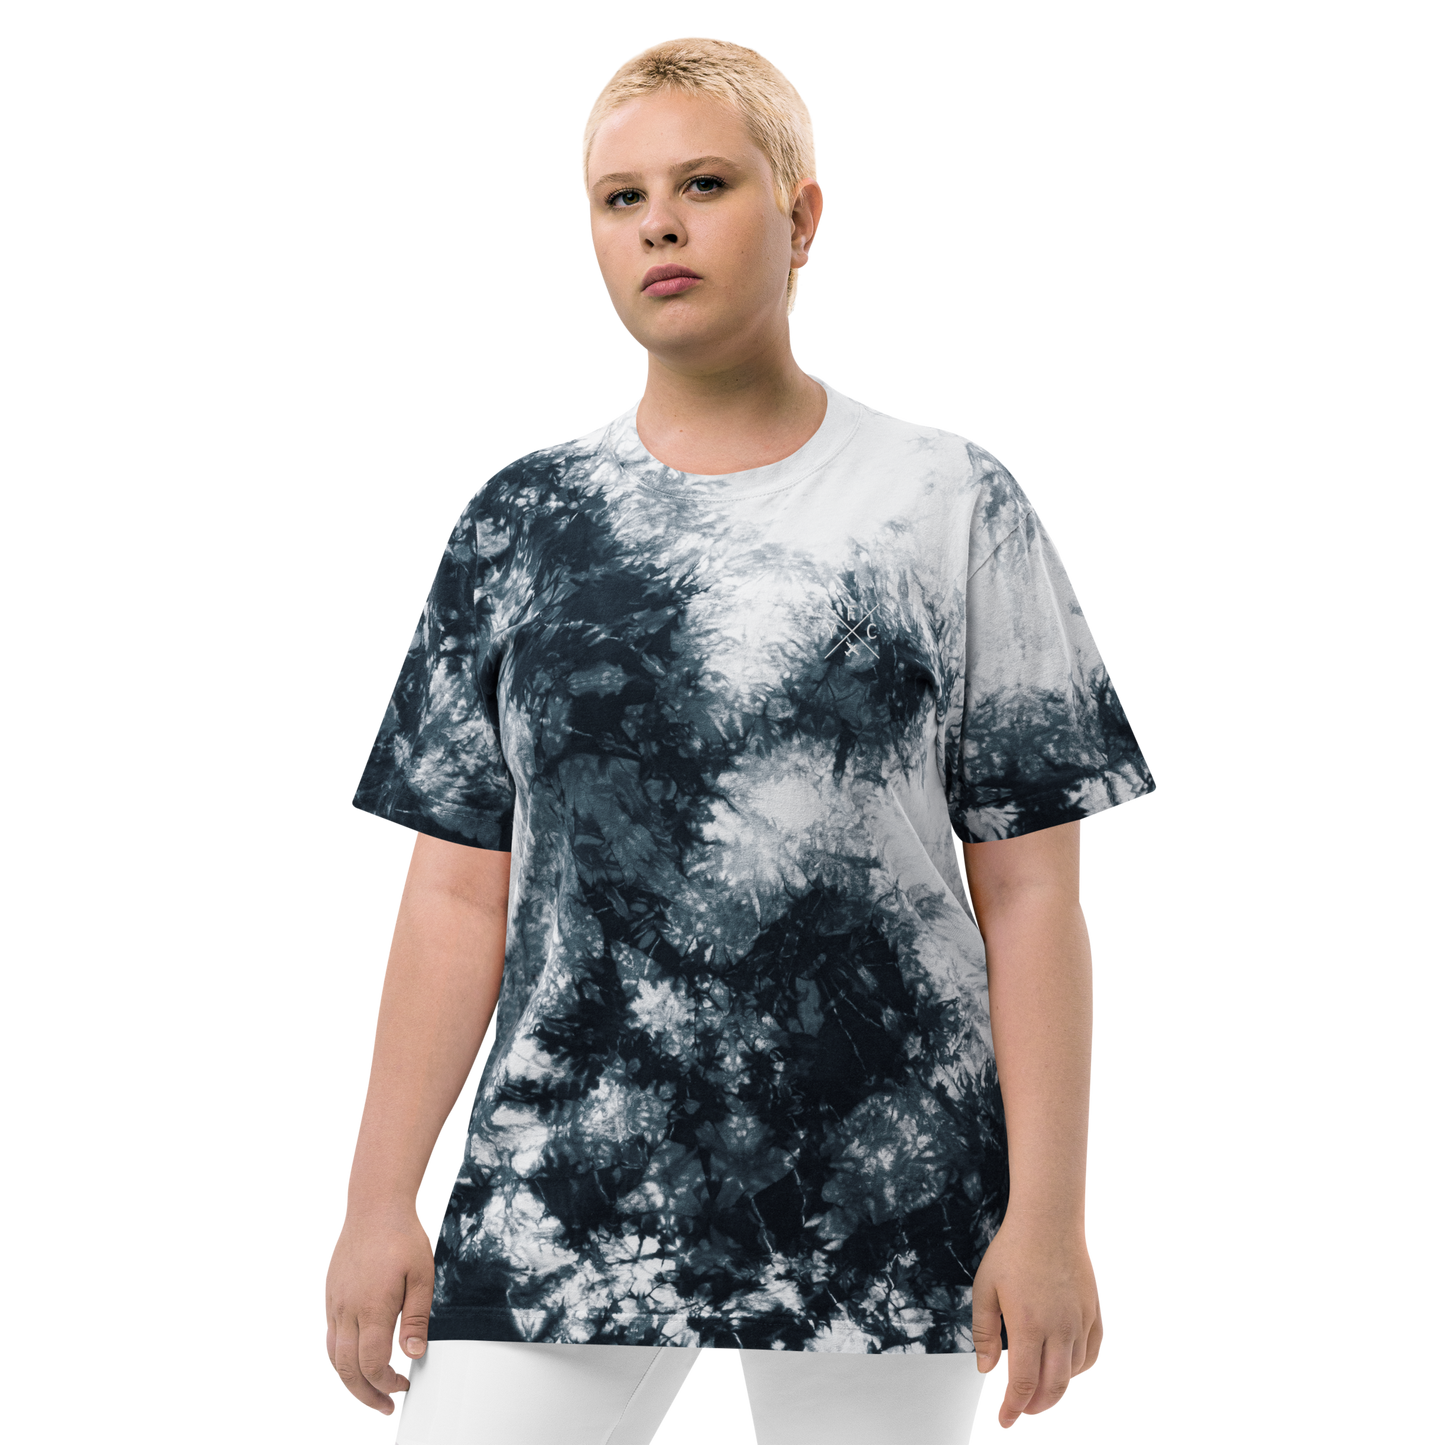 YHM Designs - YFC Fredericton Oversized Tie-Dye T-Shirt - Crossed-X Design with Airport Code and Vintage Propliner - White Embroidery - Image 16